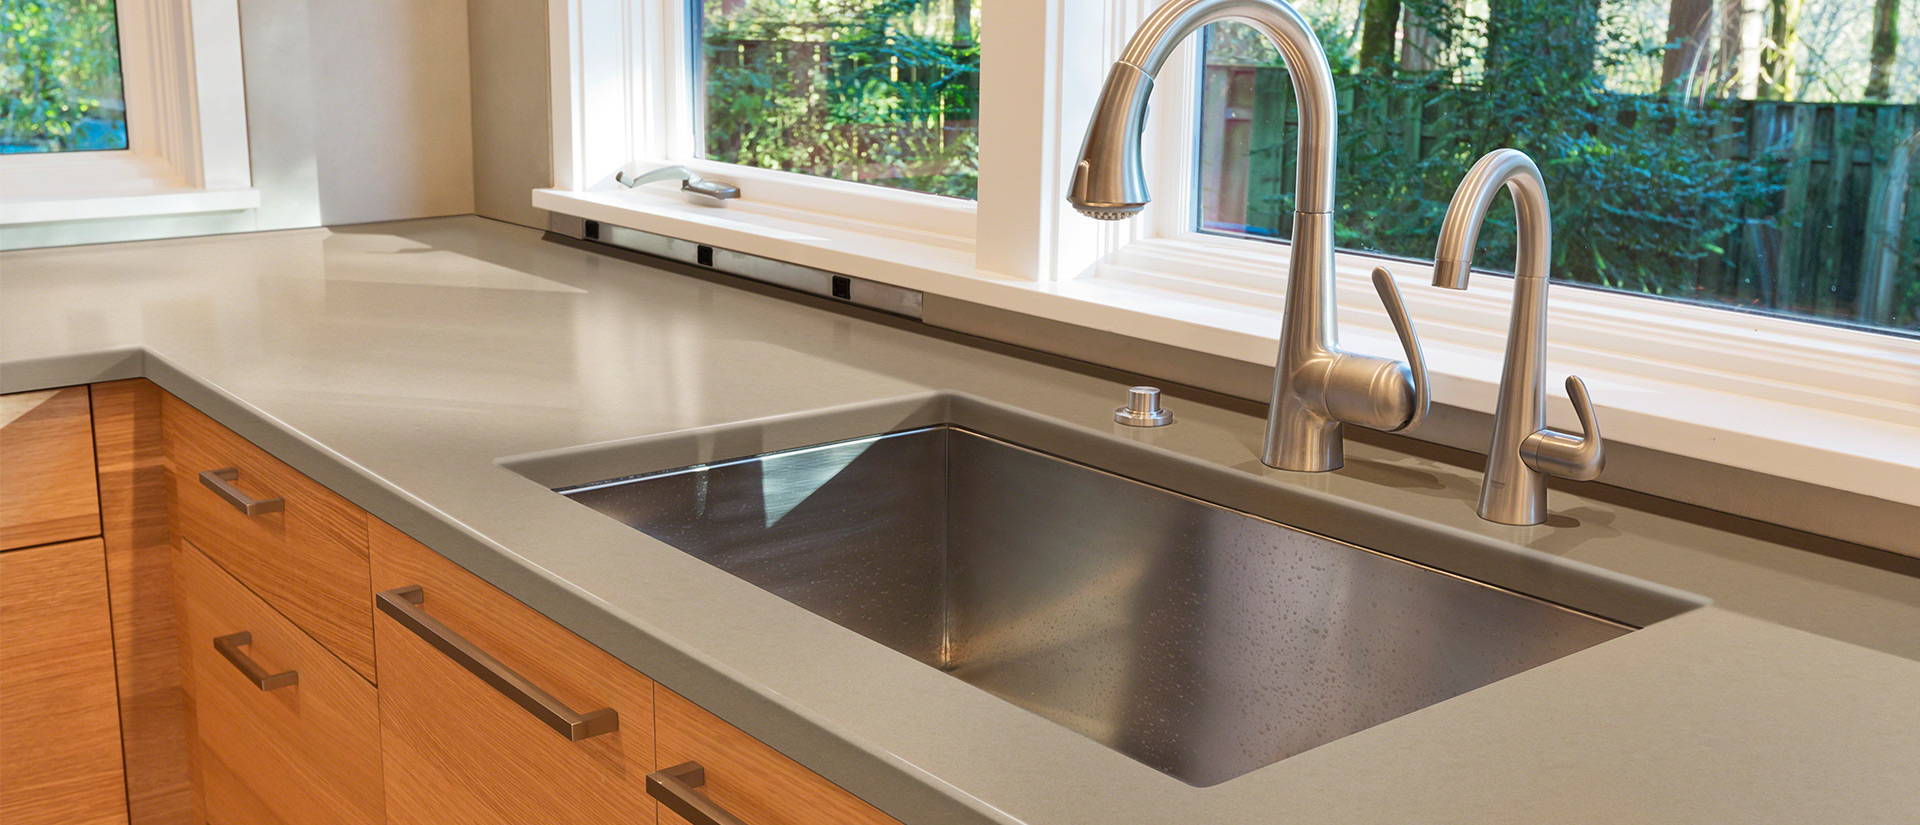 Hazelwood Quartz countertop in a warm and inviting kitchen